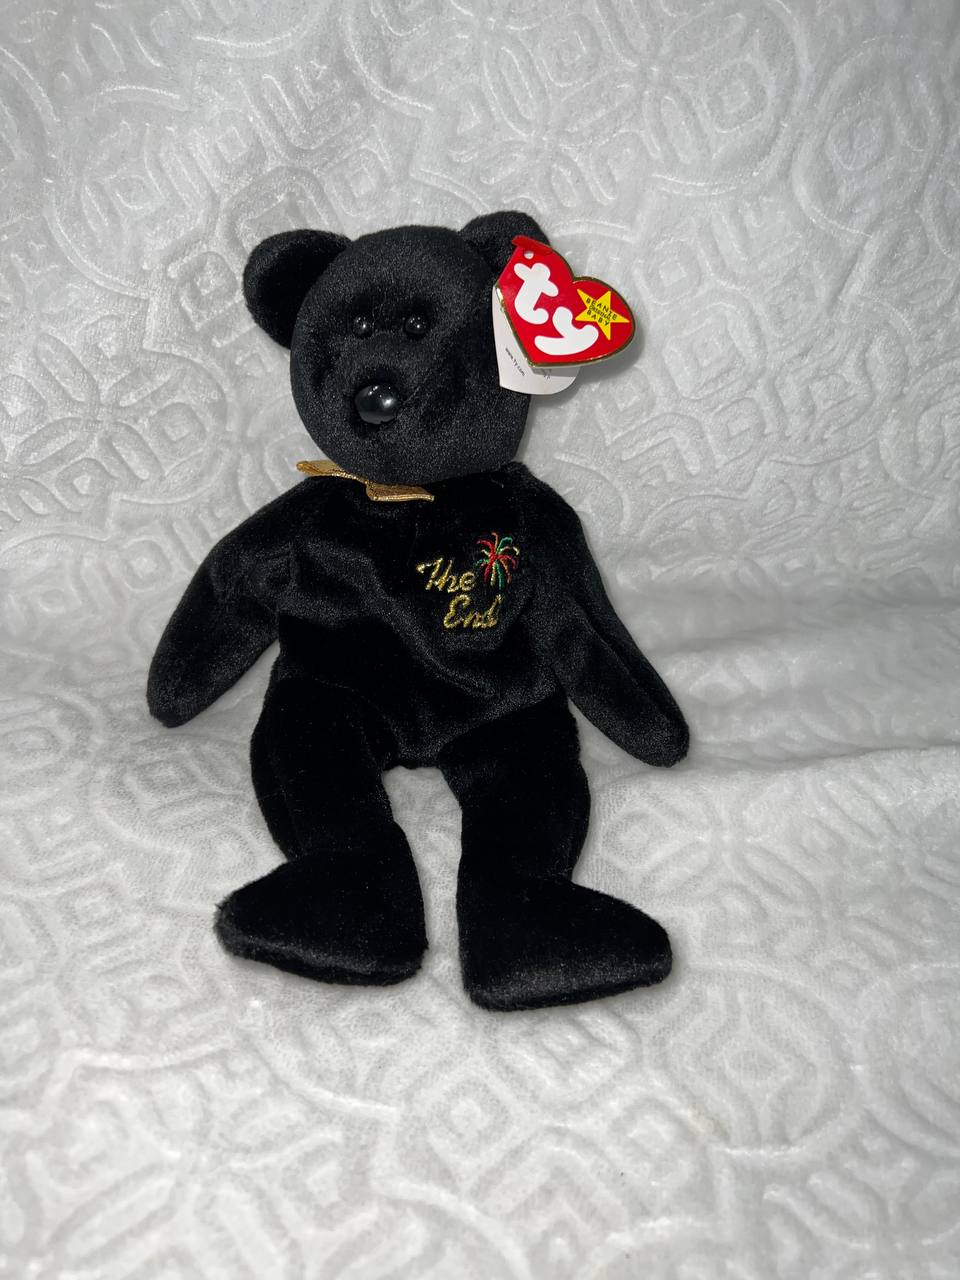 *RARE* MINT The End Beanie Baby 1999 With Tag